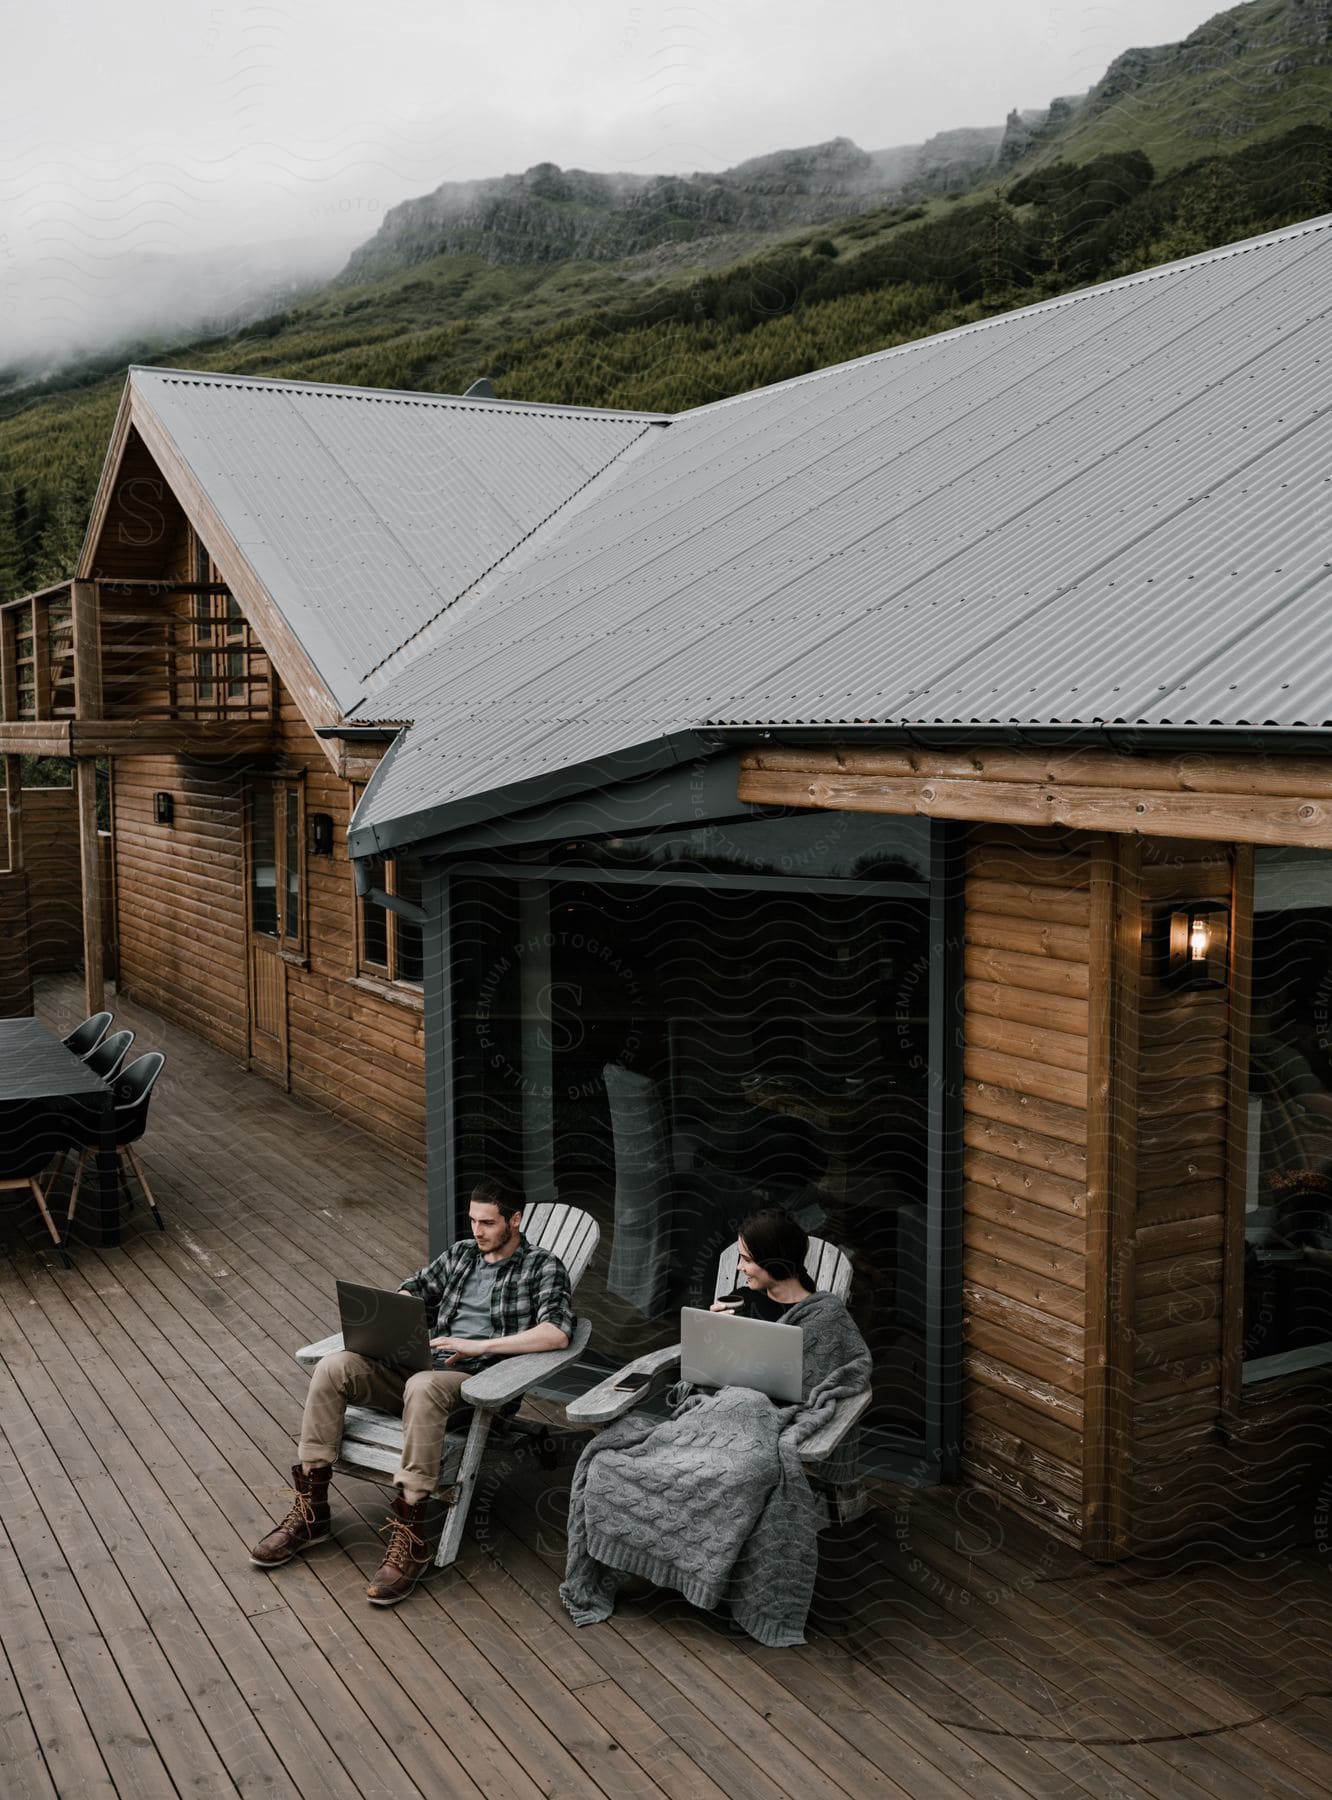 Stock photo of a couple sitting on the deck of a log cabin both holding laptops with fog on the mountain ridge behind them